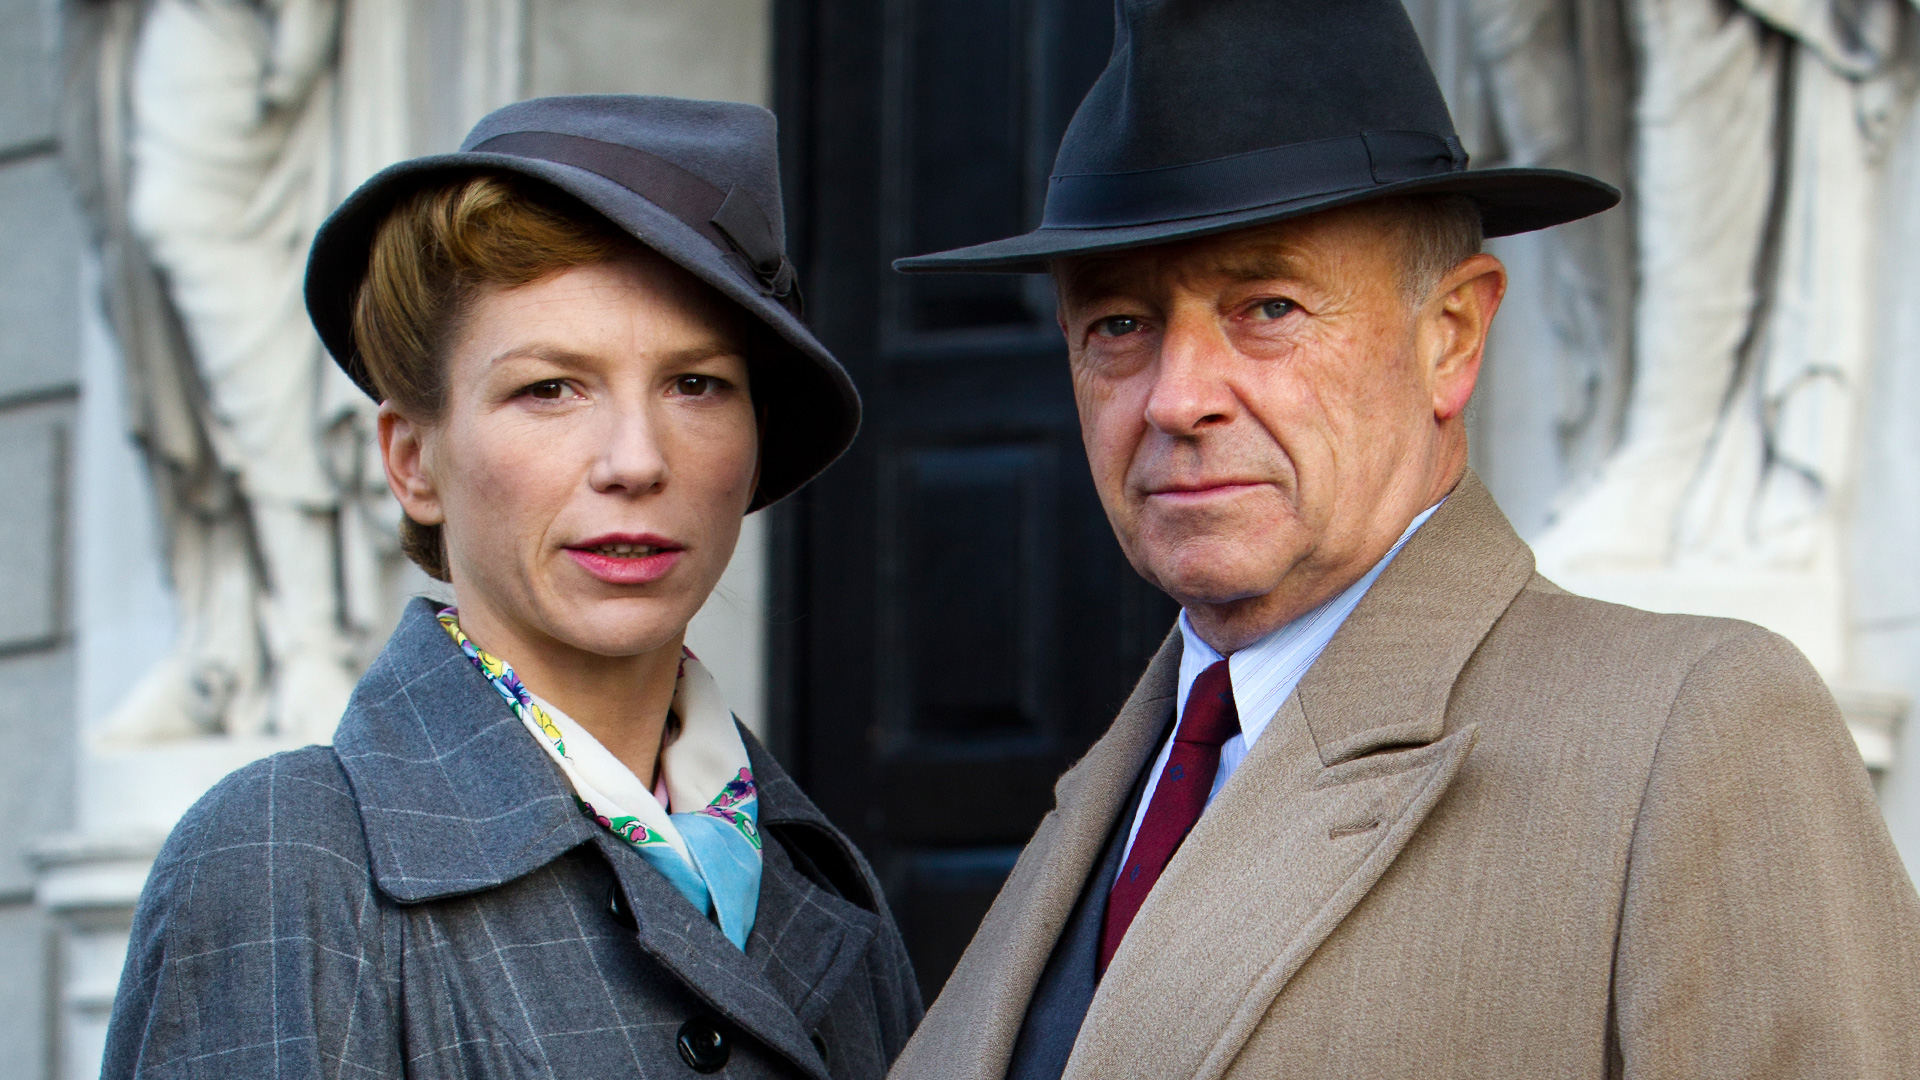 Foyle's War Series Creator Was Ready for UK Cancellation canceled TV